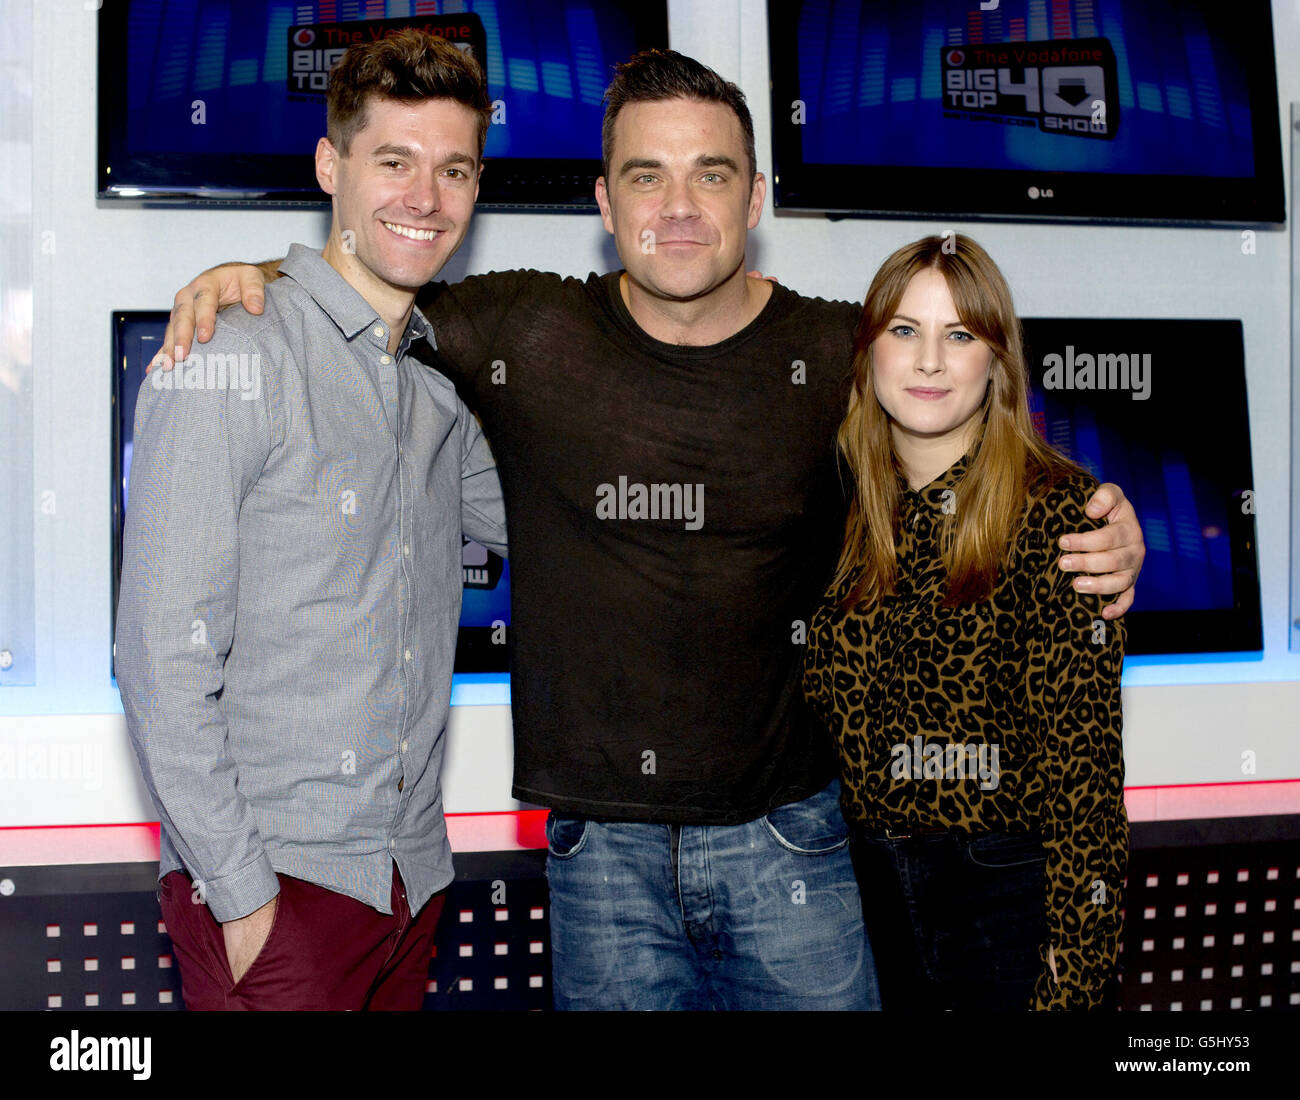 Robbie Williams pictured with Big Top 40 presenters Rich Clarke and Kat Shoob, during an interview at their studio in Leicester Square in London. Stock Photo